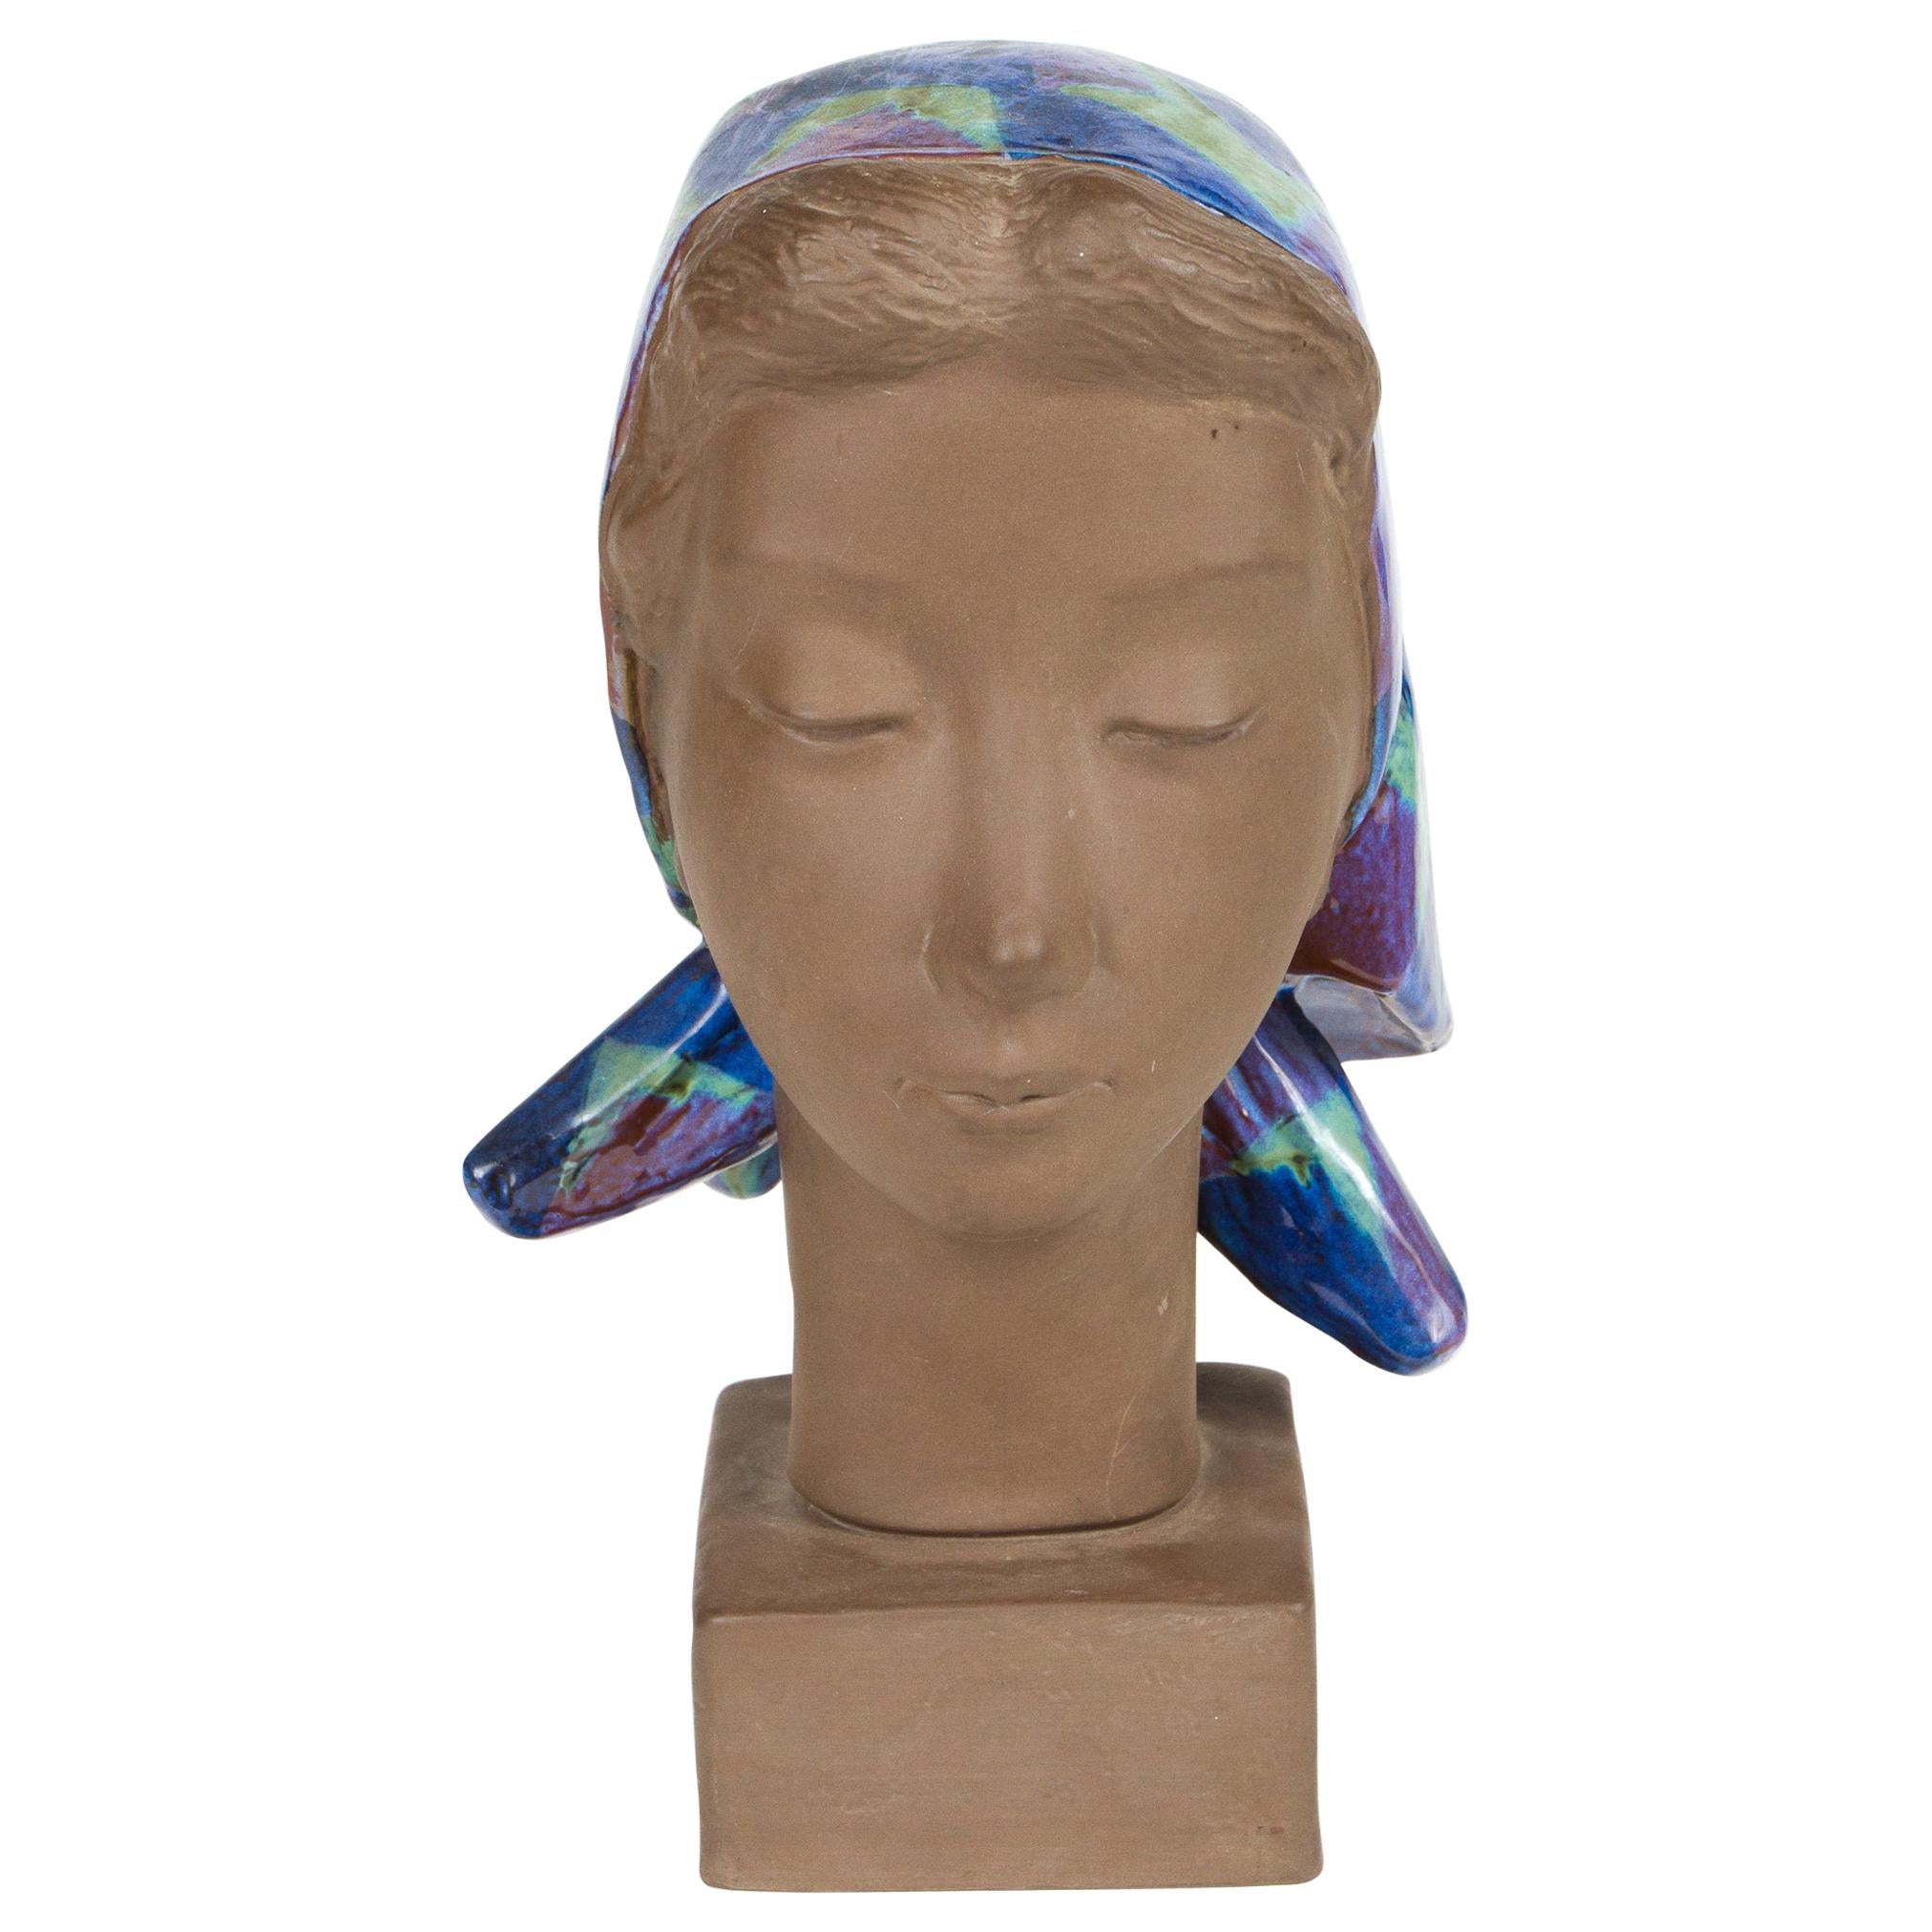 Ceramic Sculpture of a Woman Wearing Colored Scarf by Johannes Hedegaard